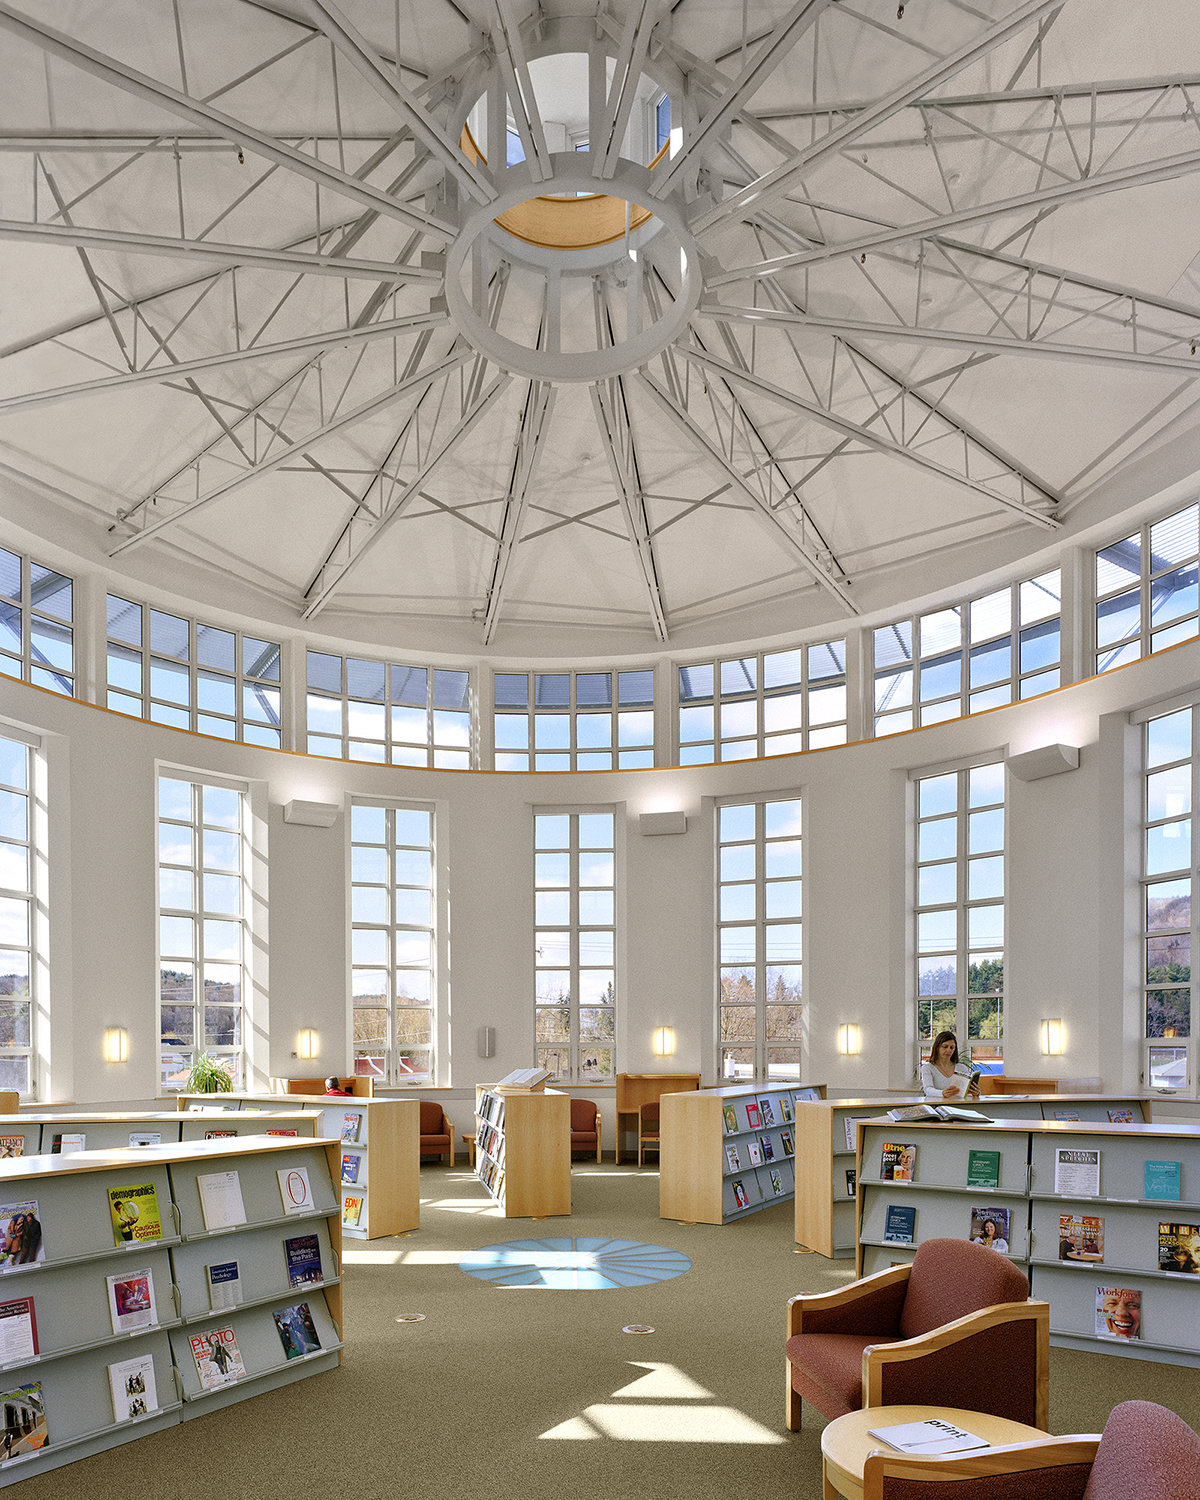 6 tskp winsted northwestern ct community college learning and resources center and library interior view of rotunda inside library 1400 0x0x1200x1500 q85